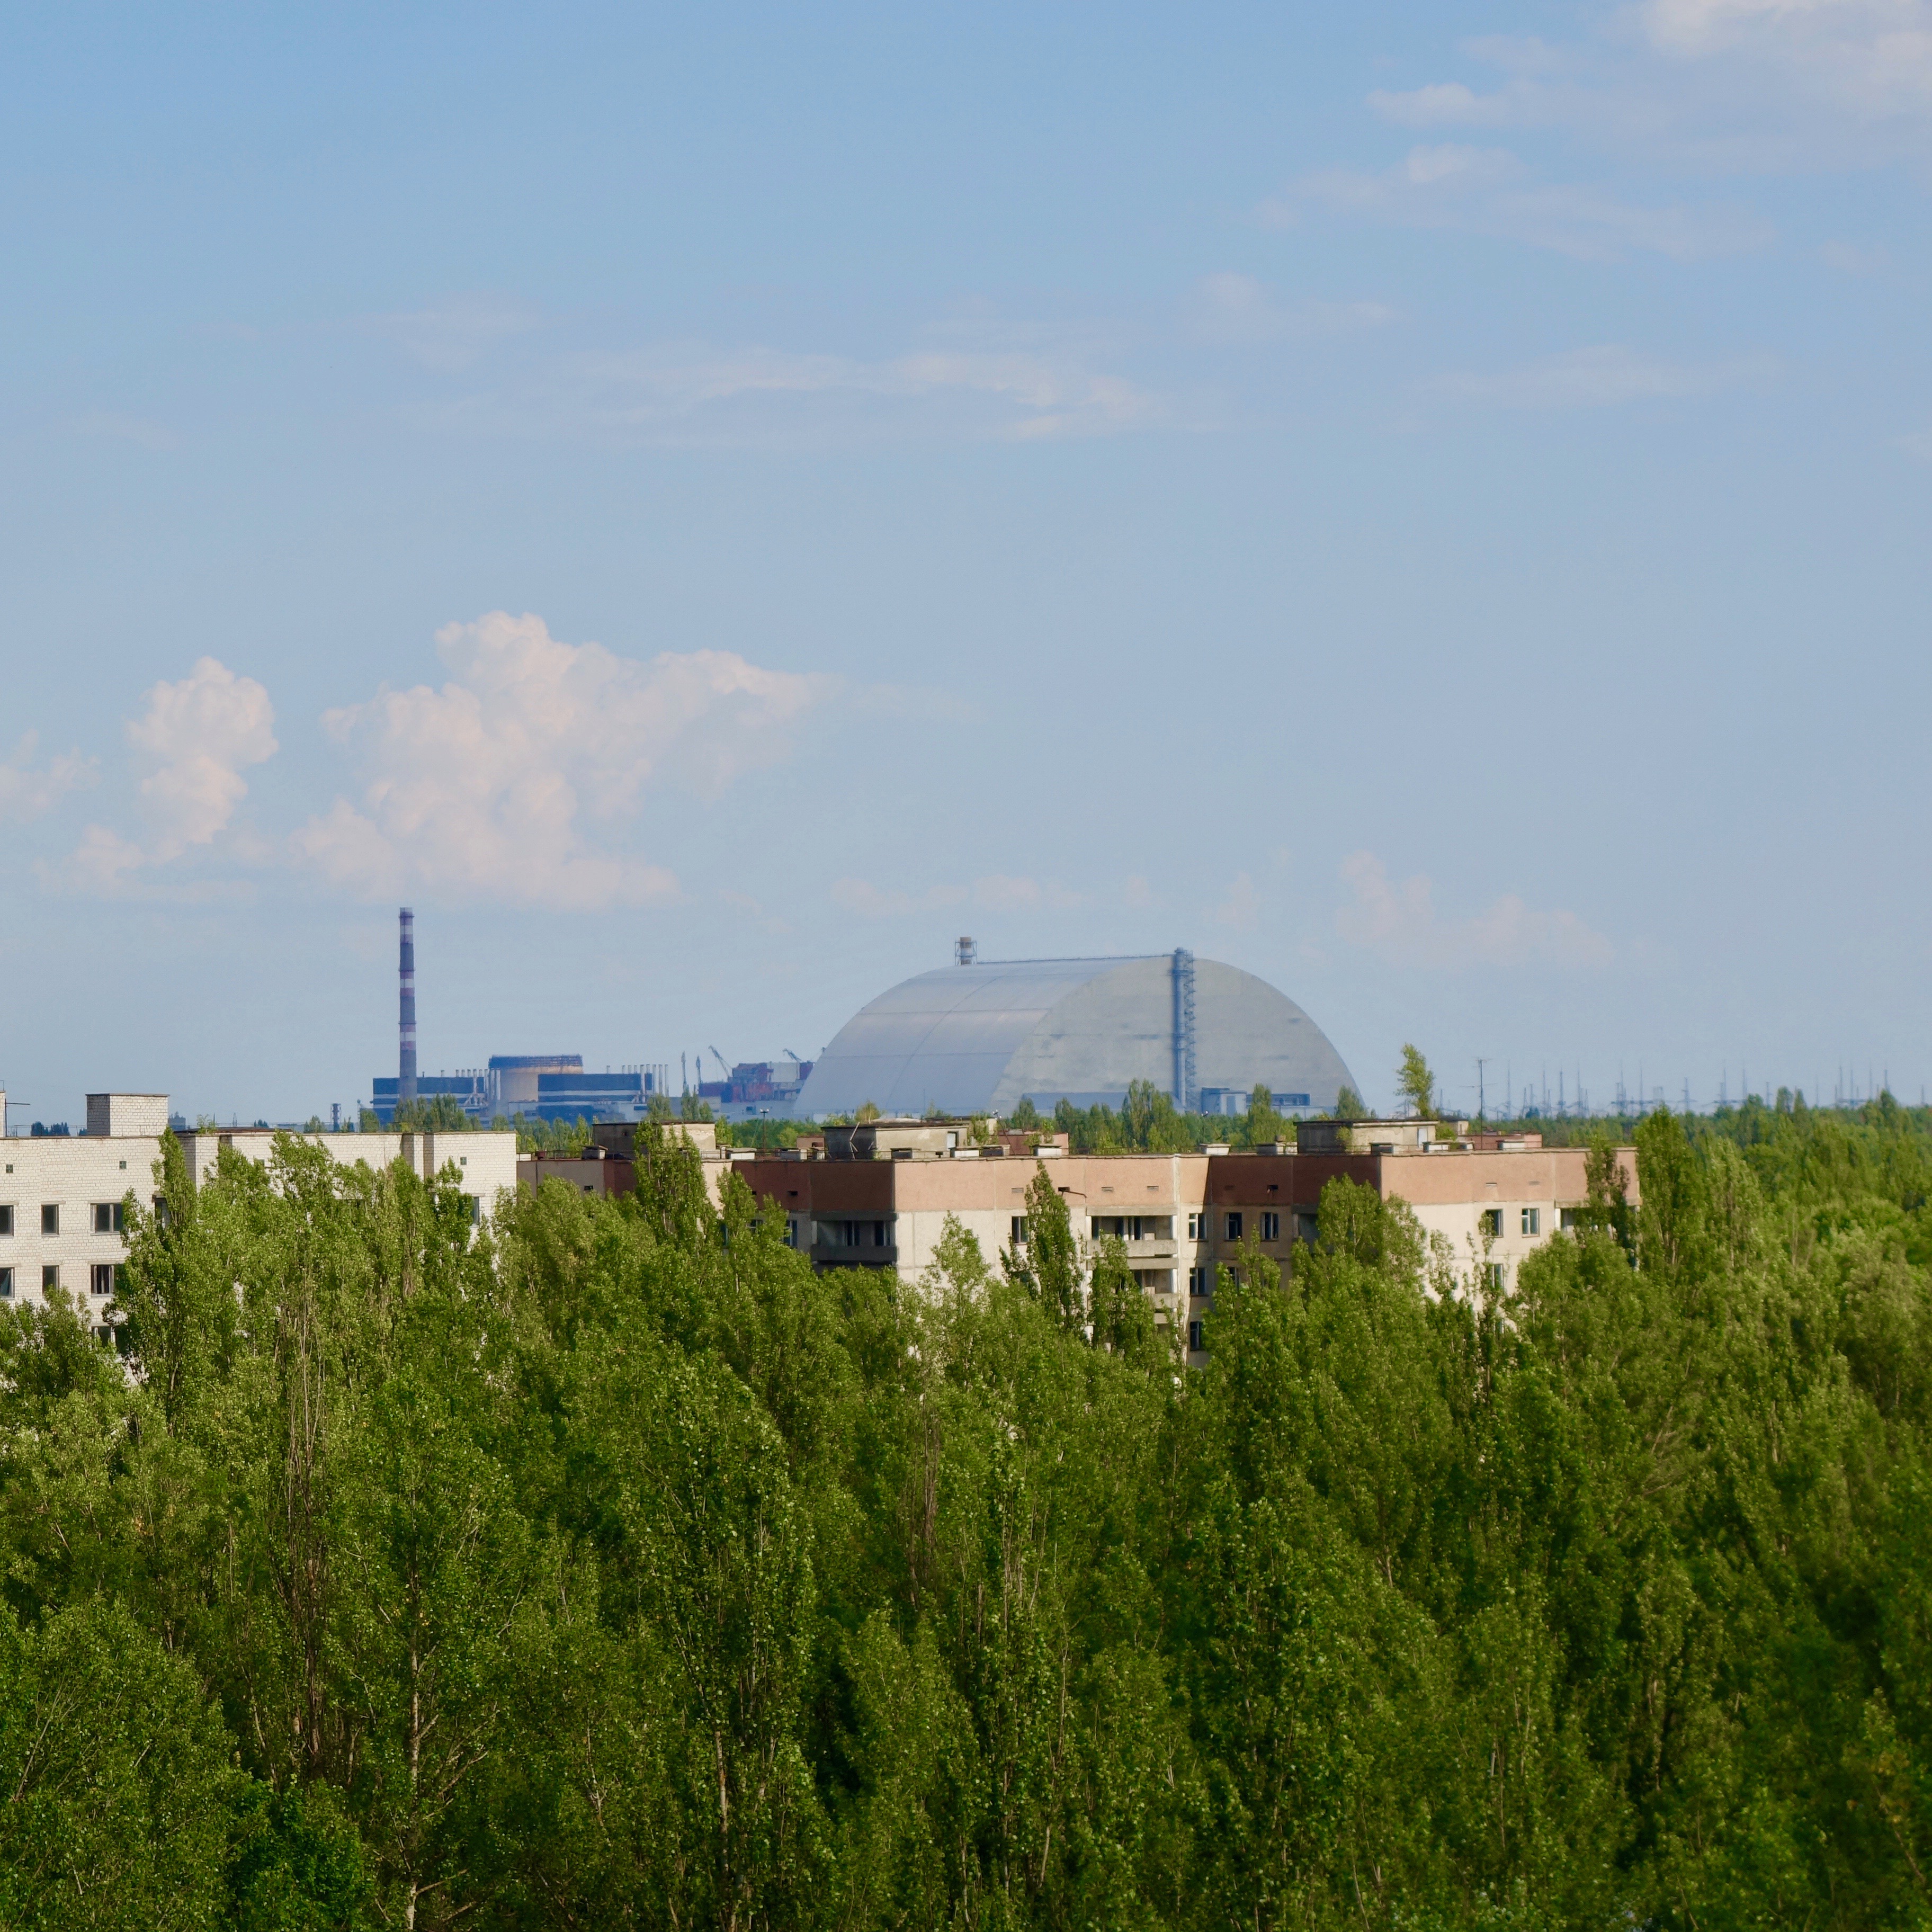 View from the rooftop of one of the many empty apartment buildings in the ghost town of Prypriat.  In the background you can see the stainless steel sarcophagus covering the melted down Chernobyl Reactor number four, exploded in April 1986.  